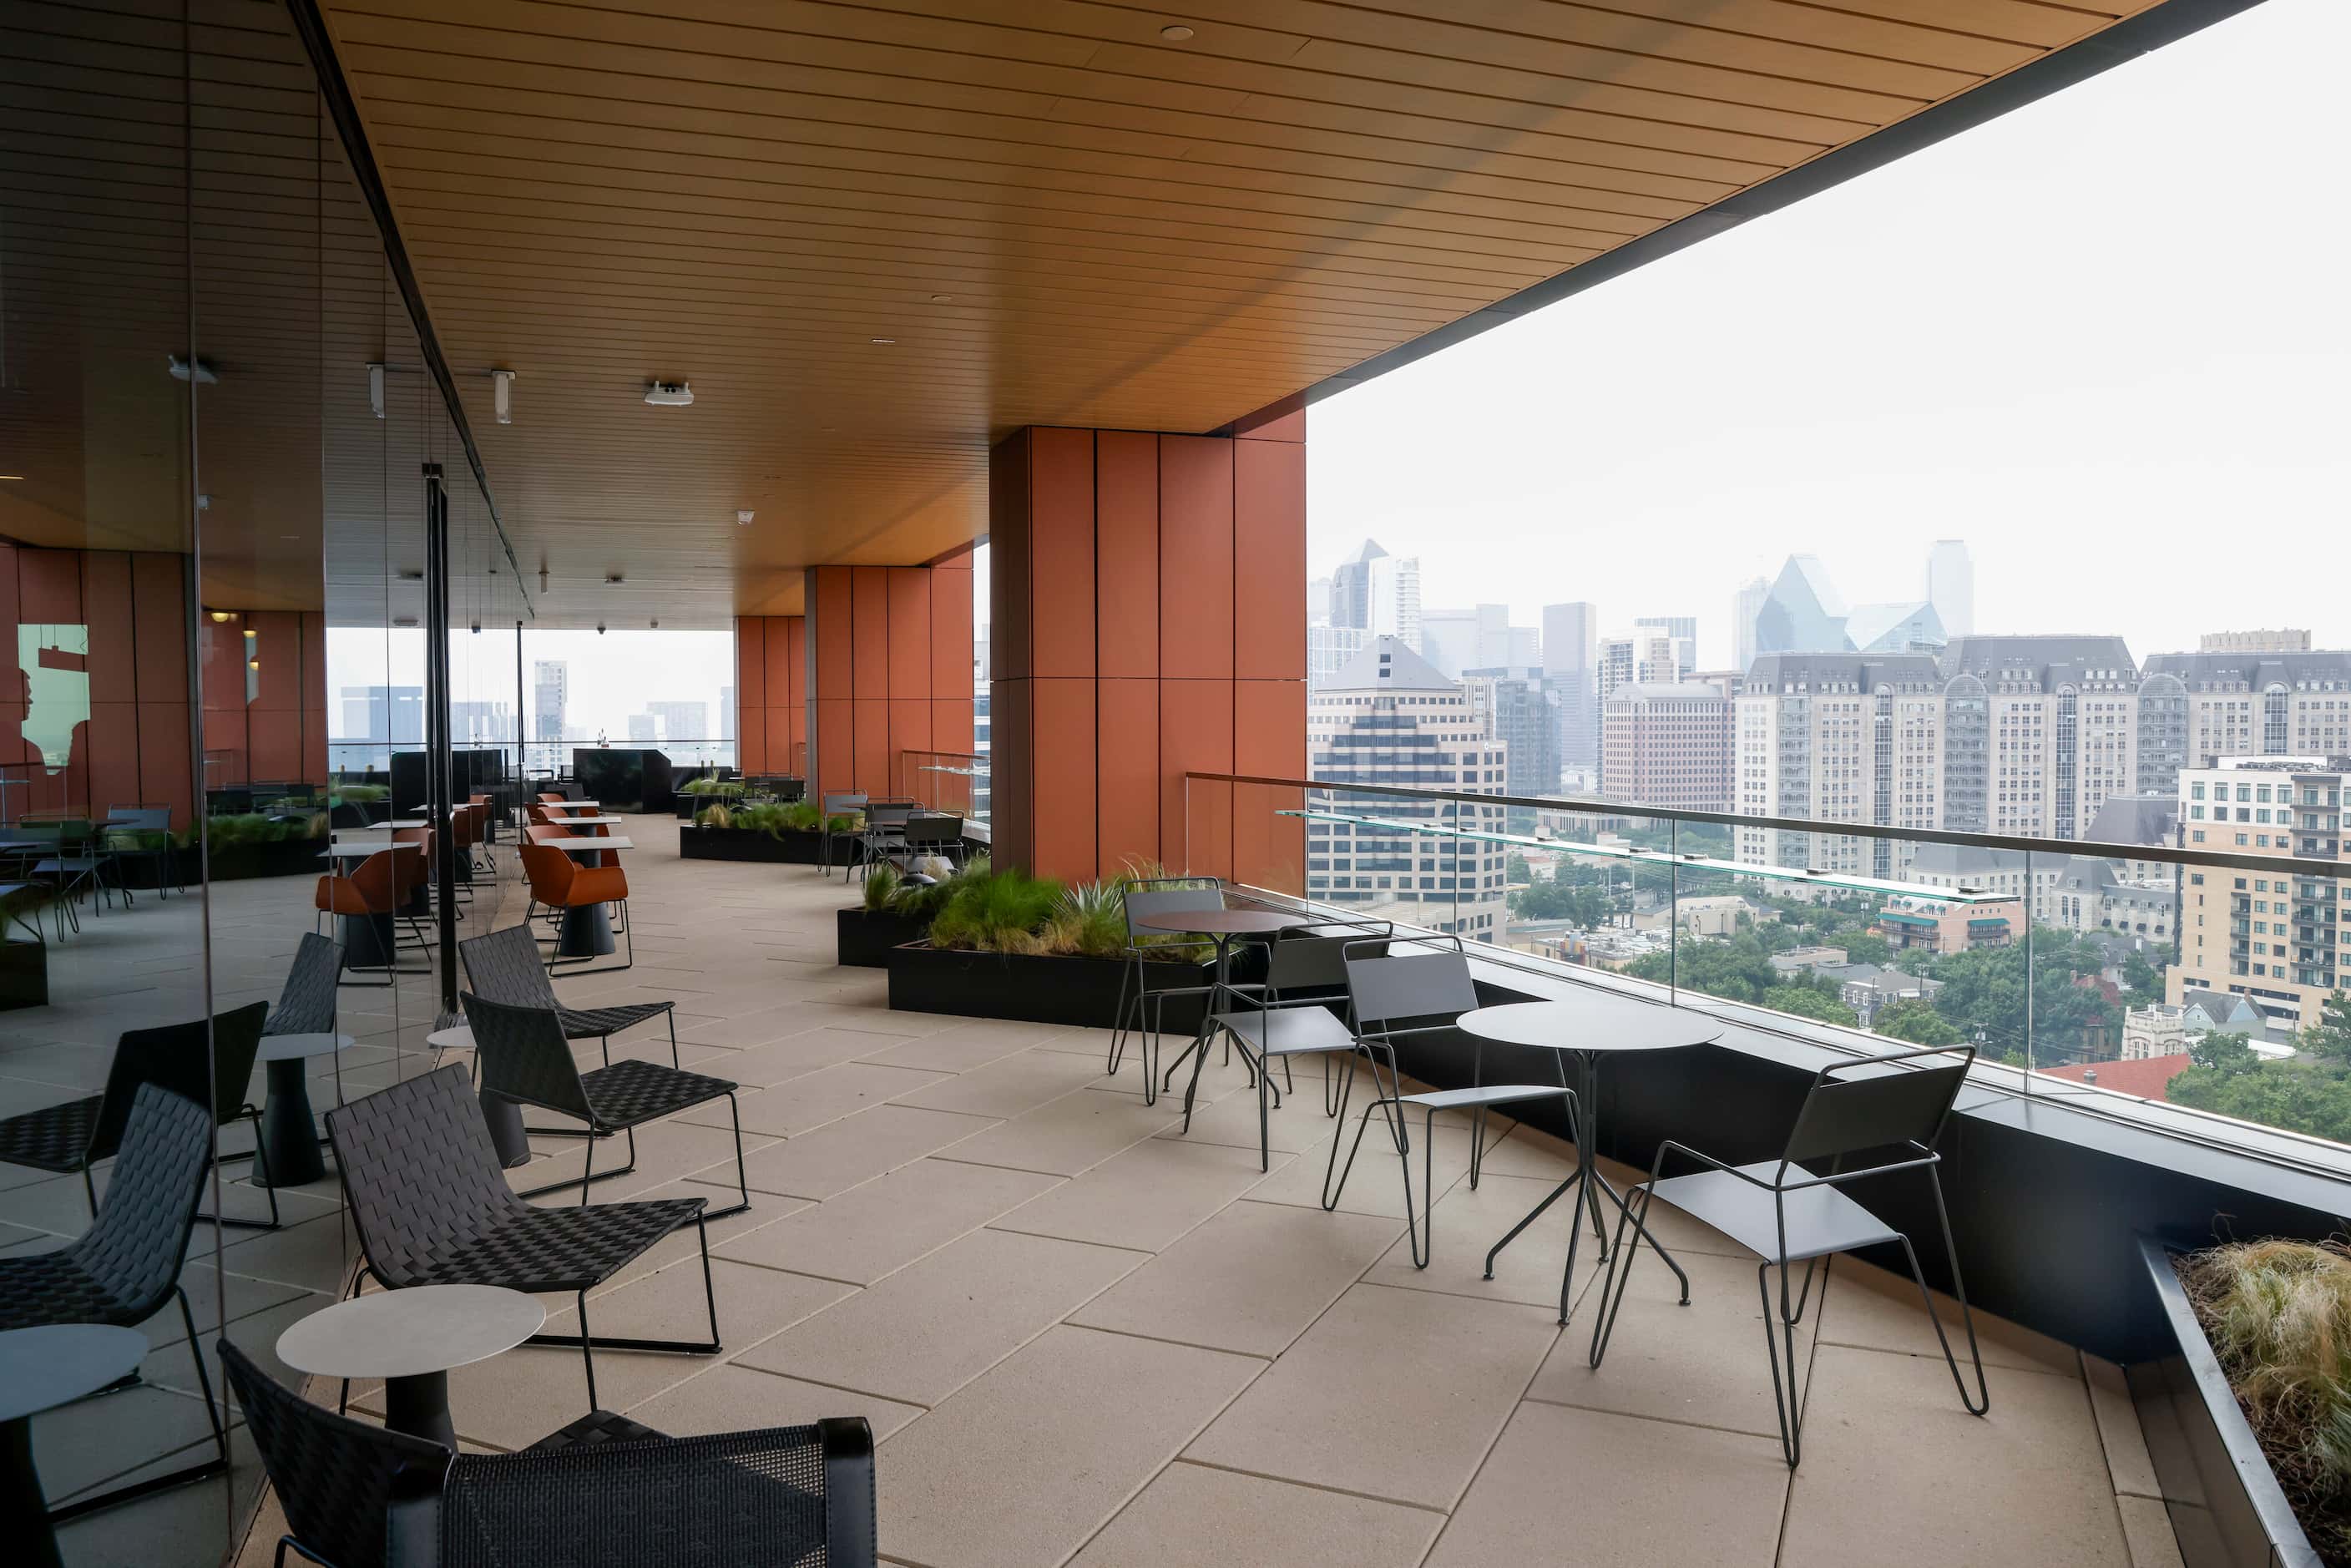 The amenity level also houses a covered terrace with views of the Dallas skyline.